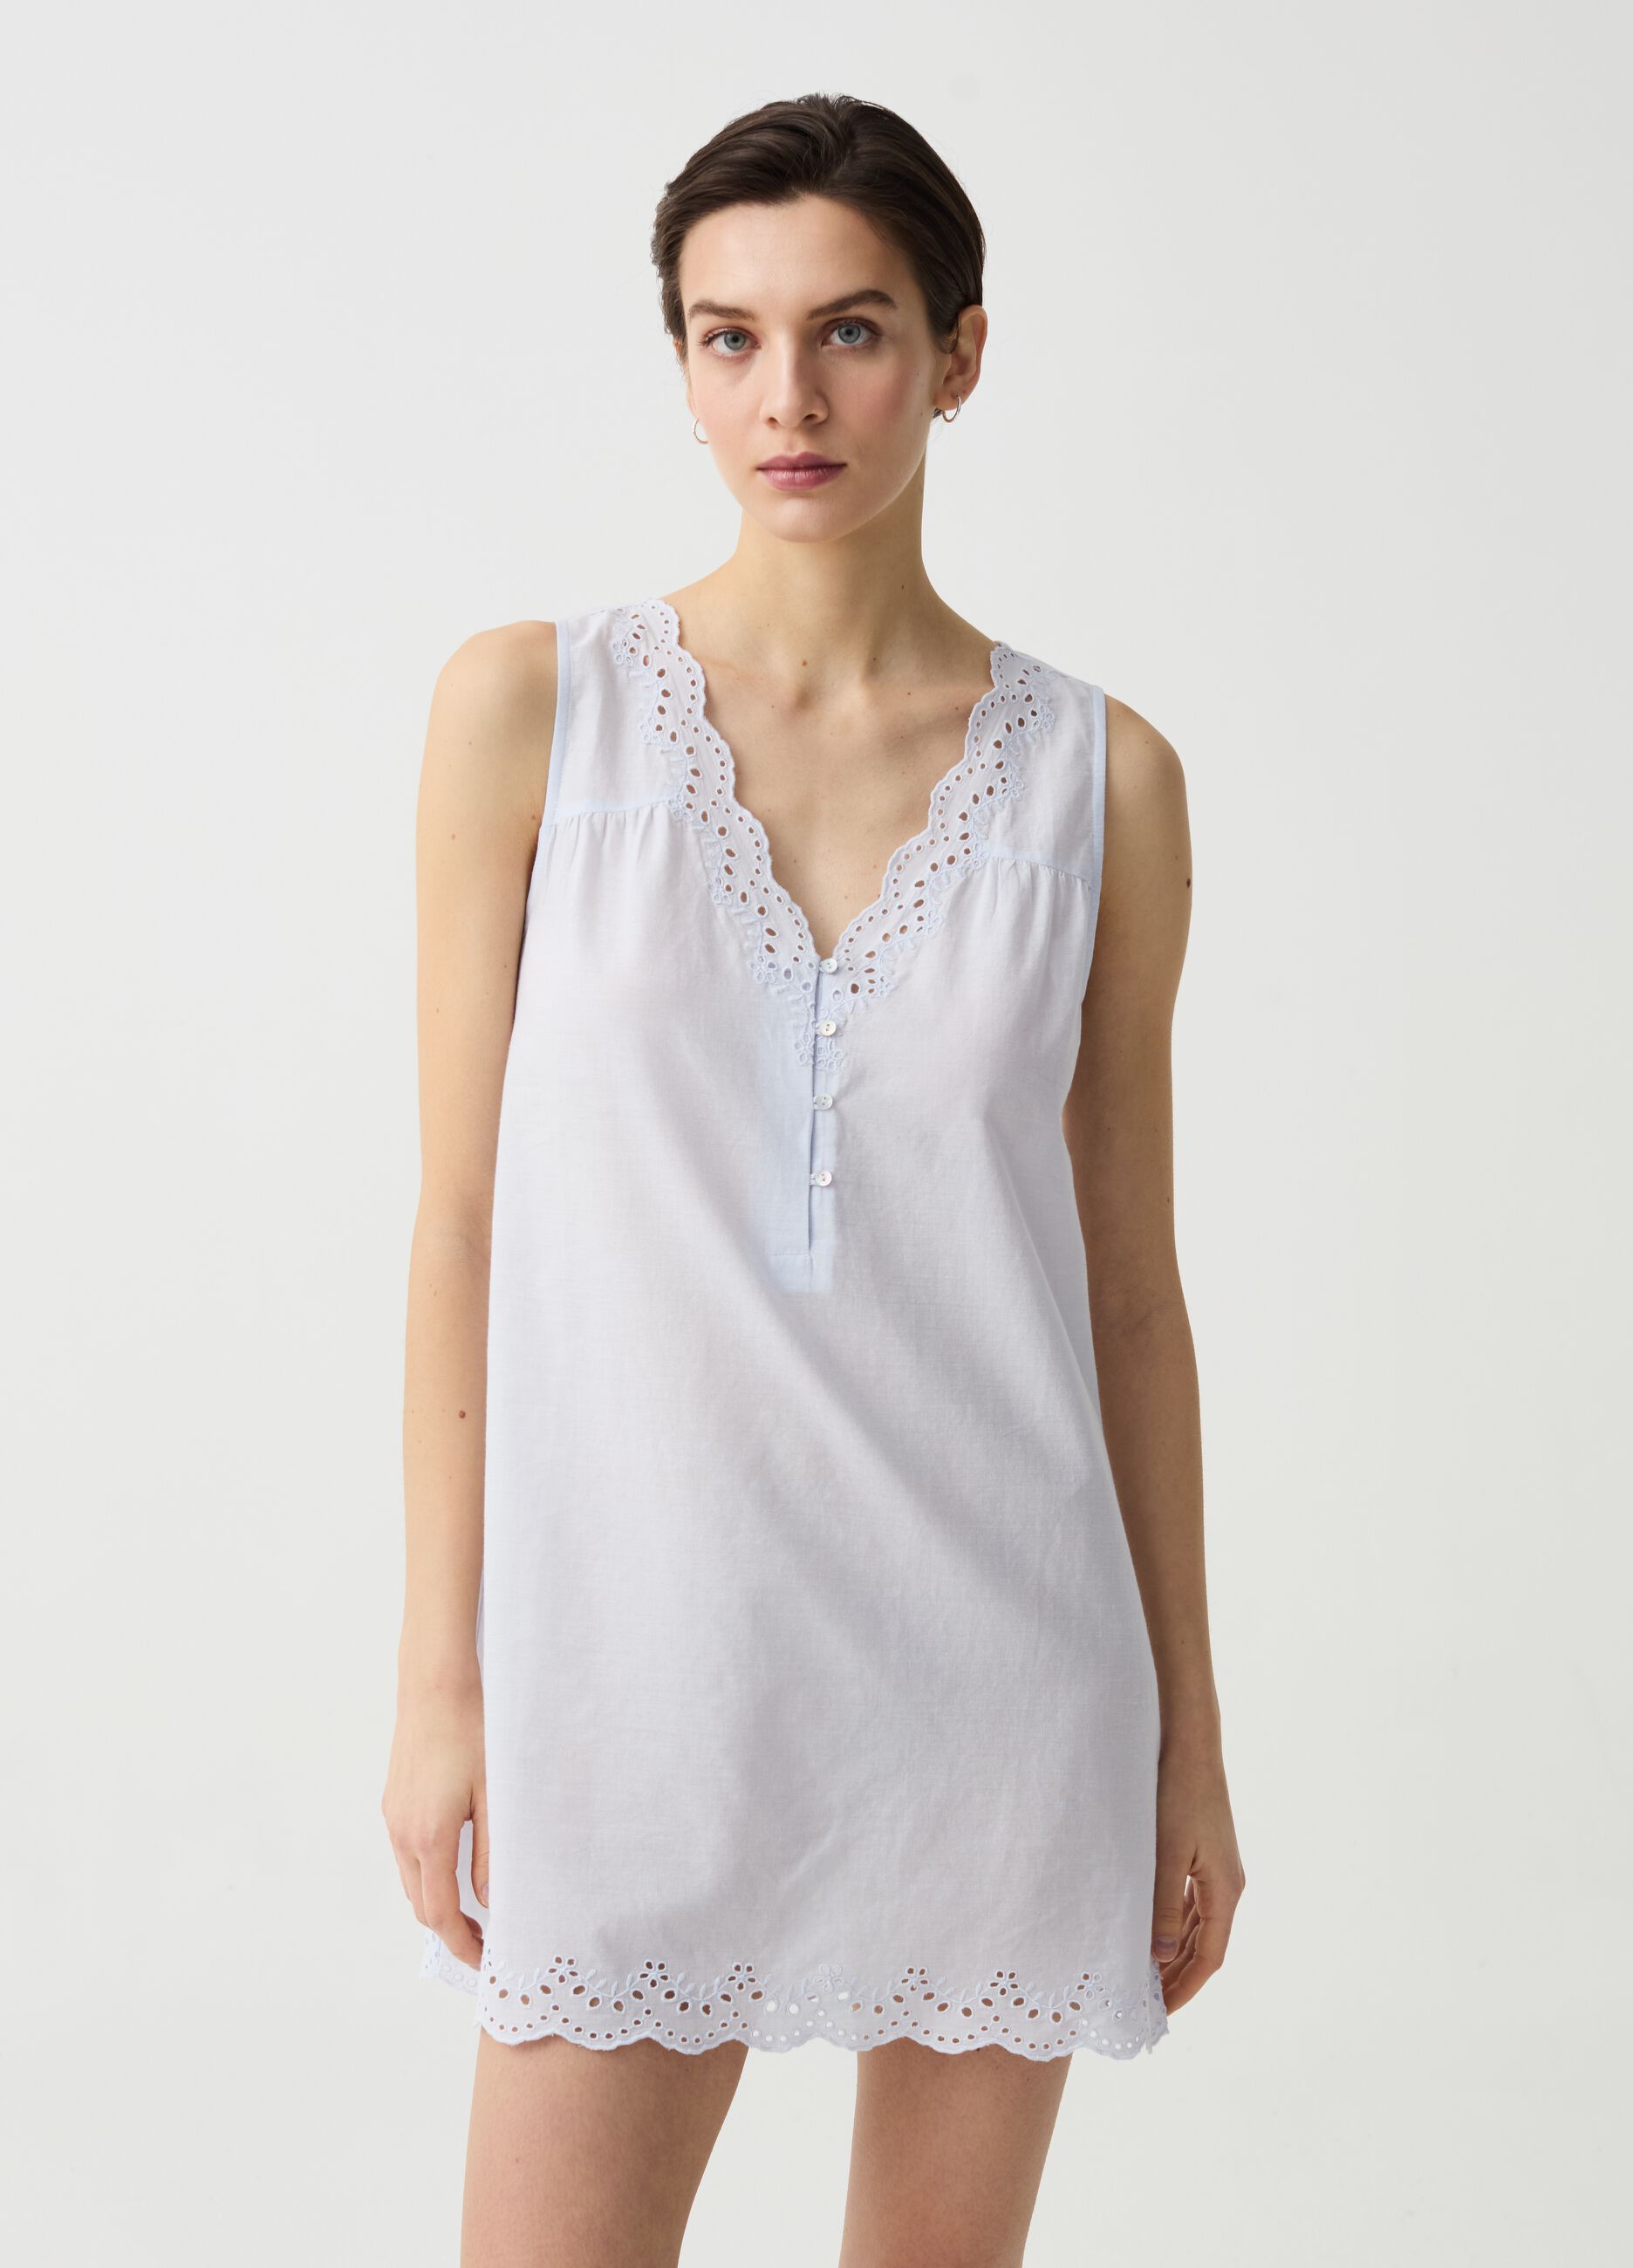 Nightdress with broderie anglaise edging